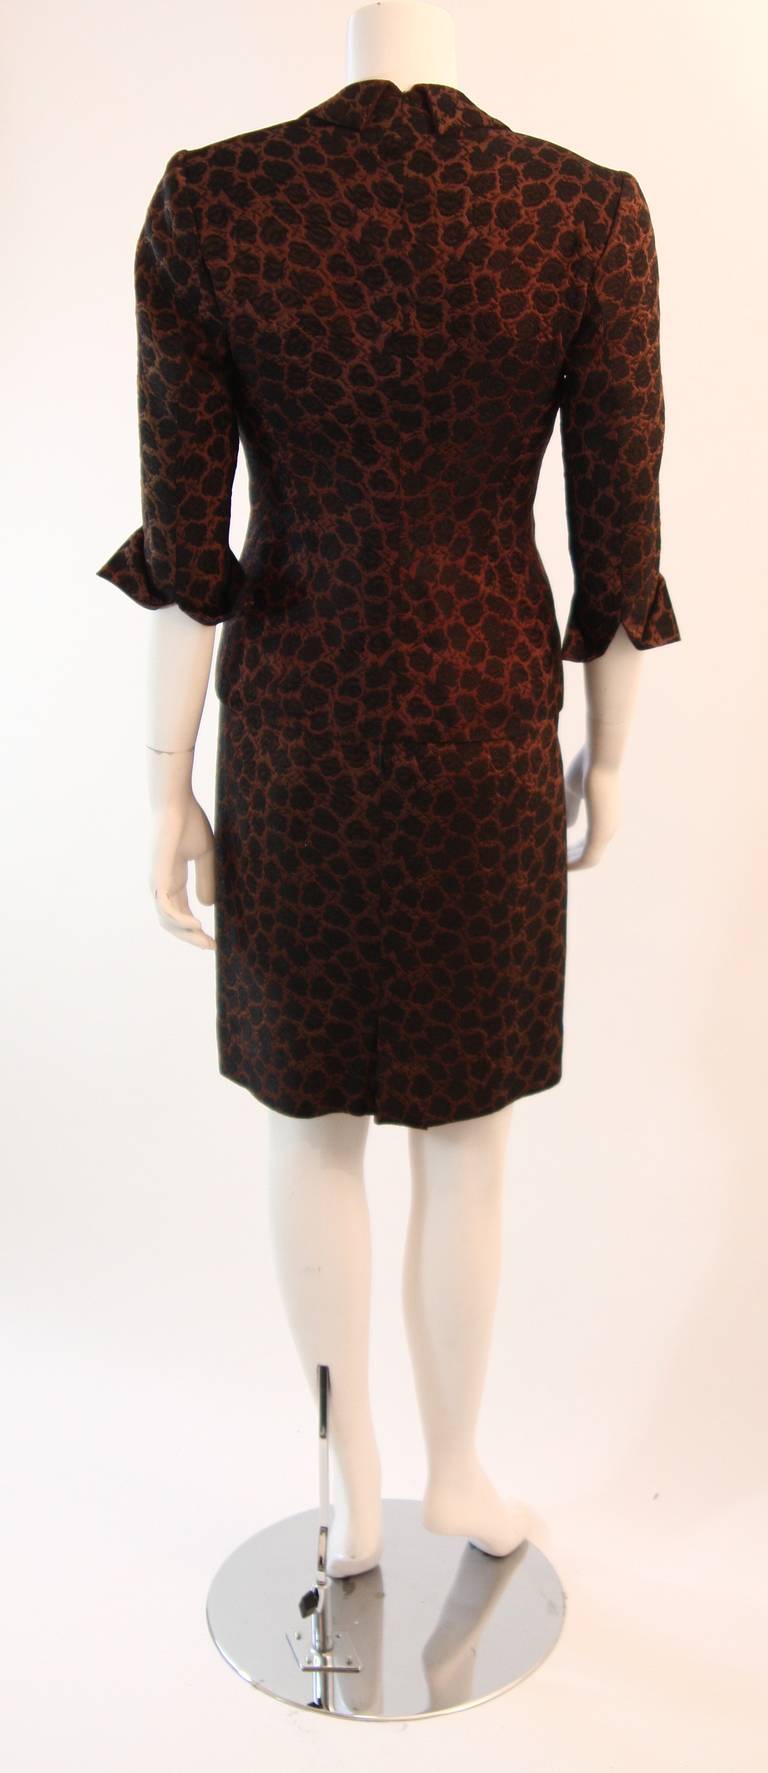 Stunning Mingolini Guggenheim Brown and Black Beaded Couture Dress Set For Sale 5